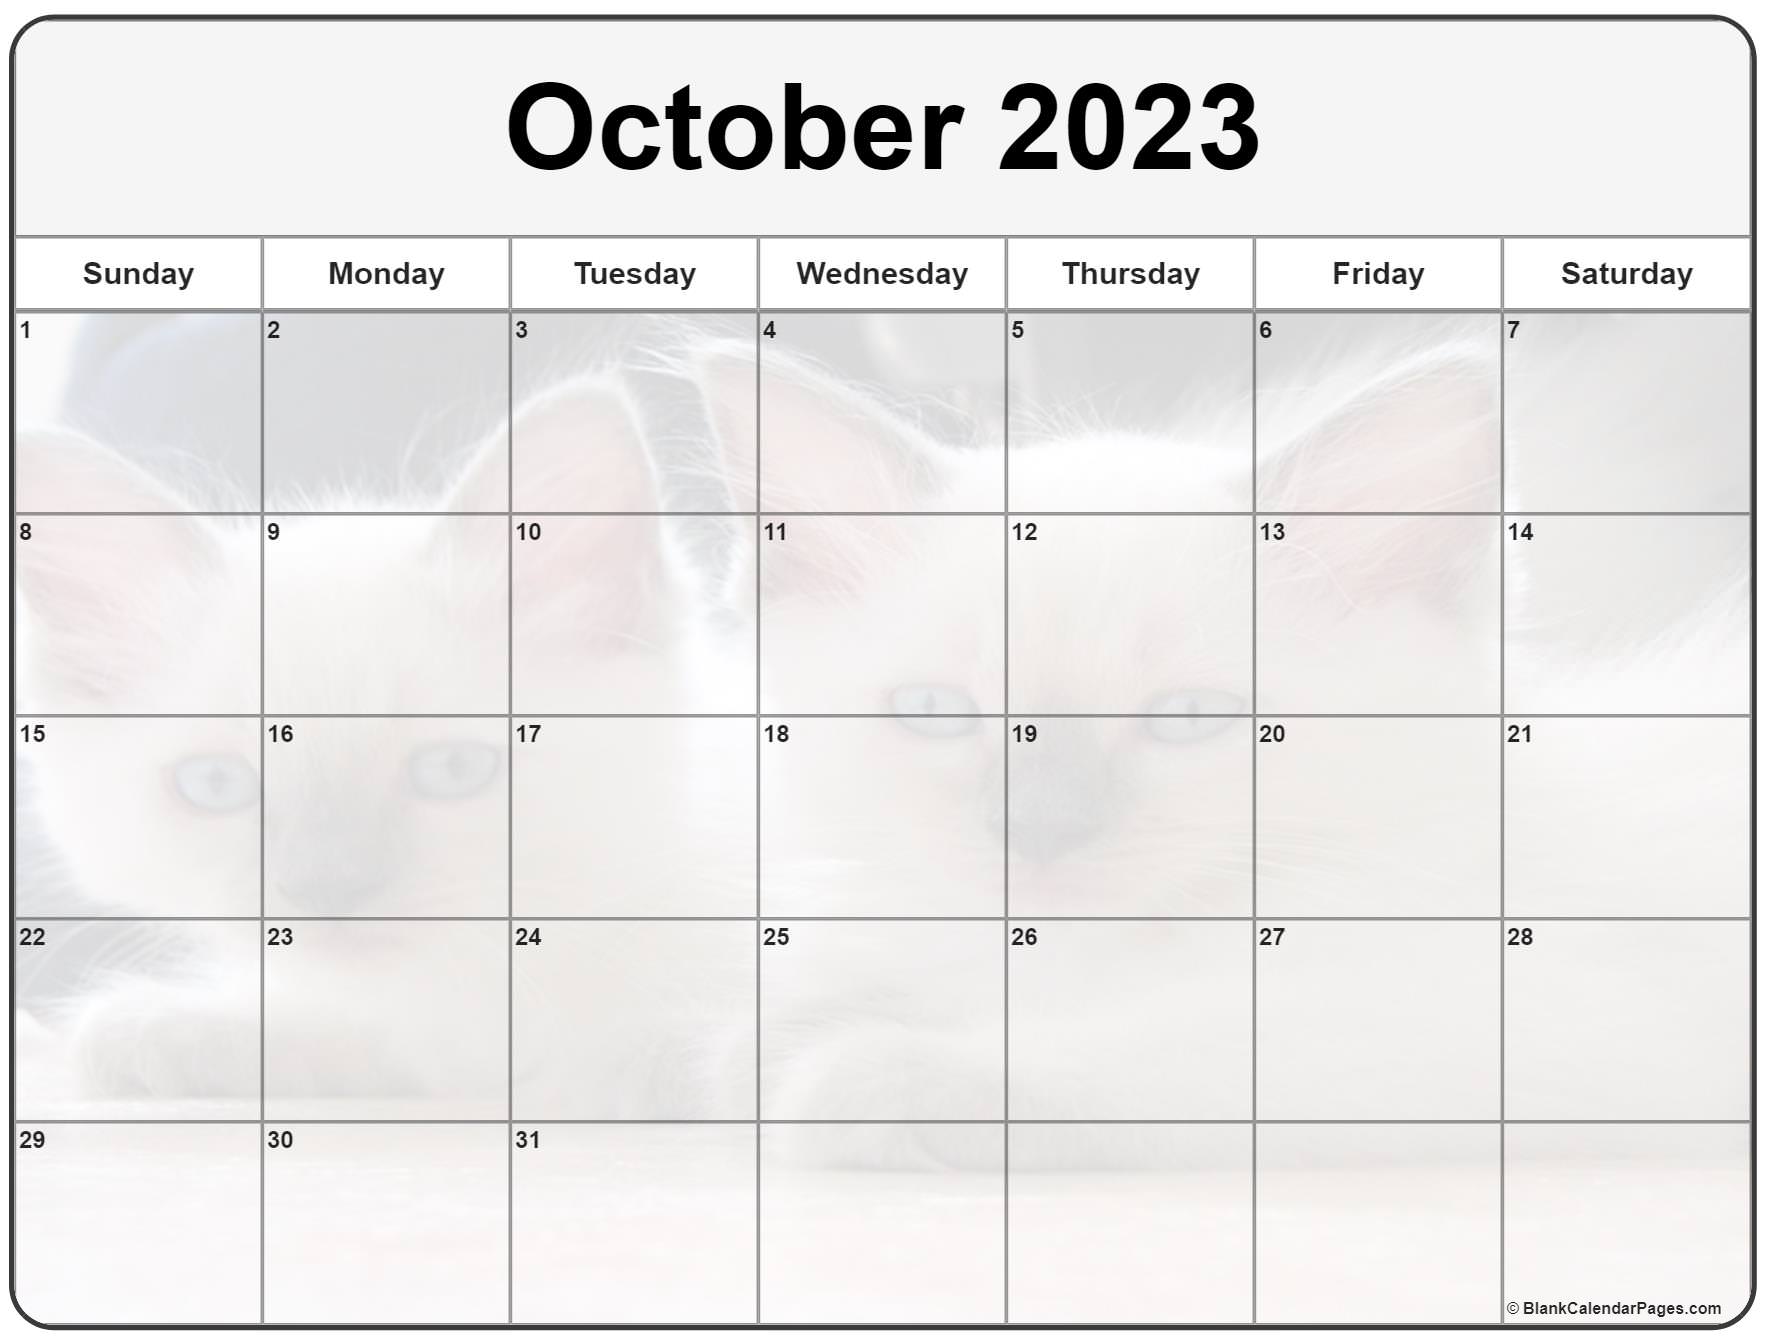 october-2023-calendar-of-the-month-free-printable-october-2023-october-2023-calendar-free